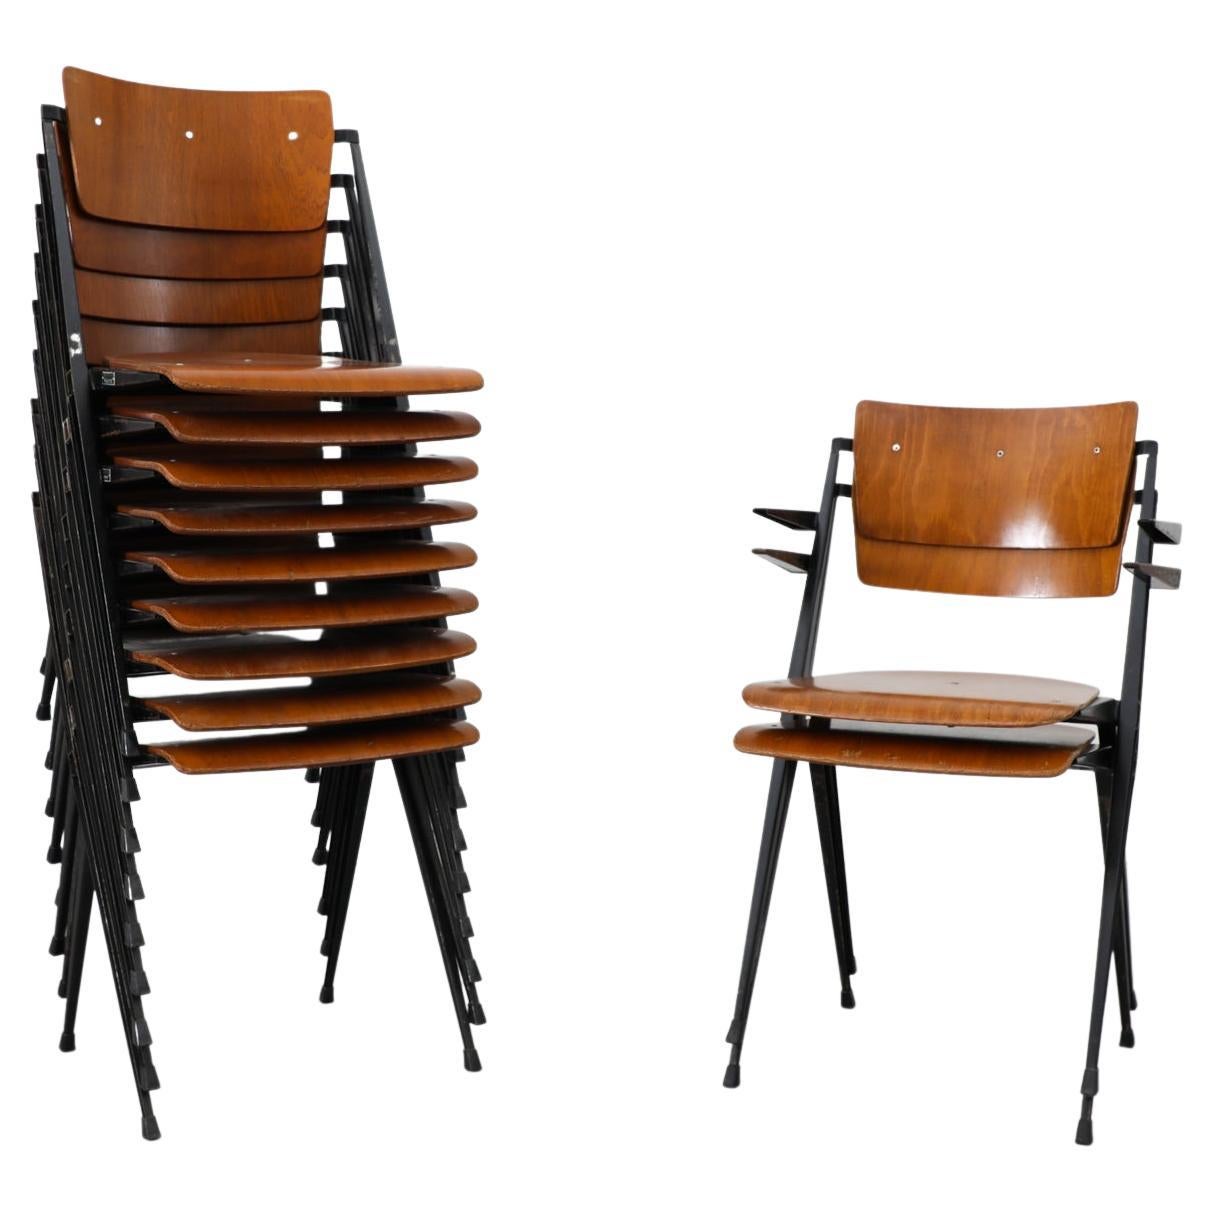 Set of 10 Wim Rietveld Pyramid Stacking Chairs in Teak with Black Enameled Legs For Sale